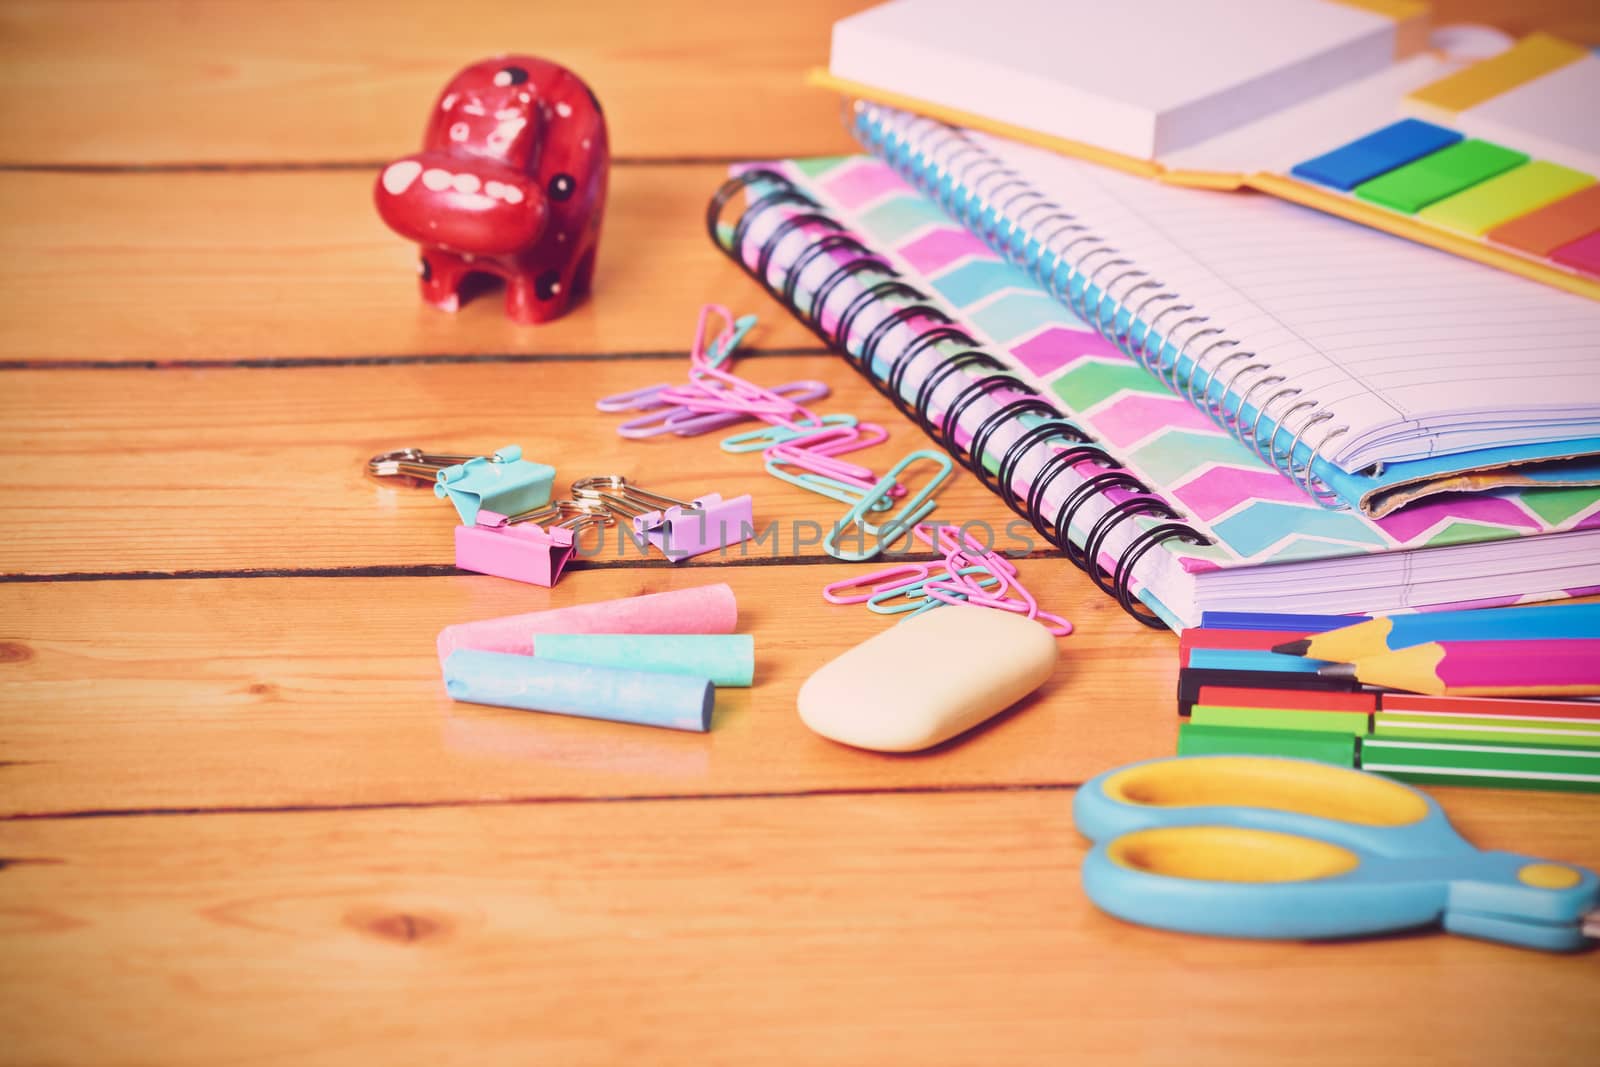 Cute school stationary on wooden background by Mendelex